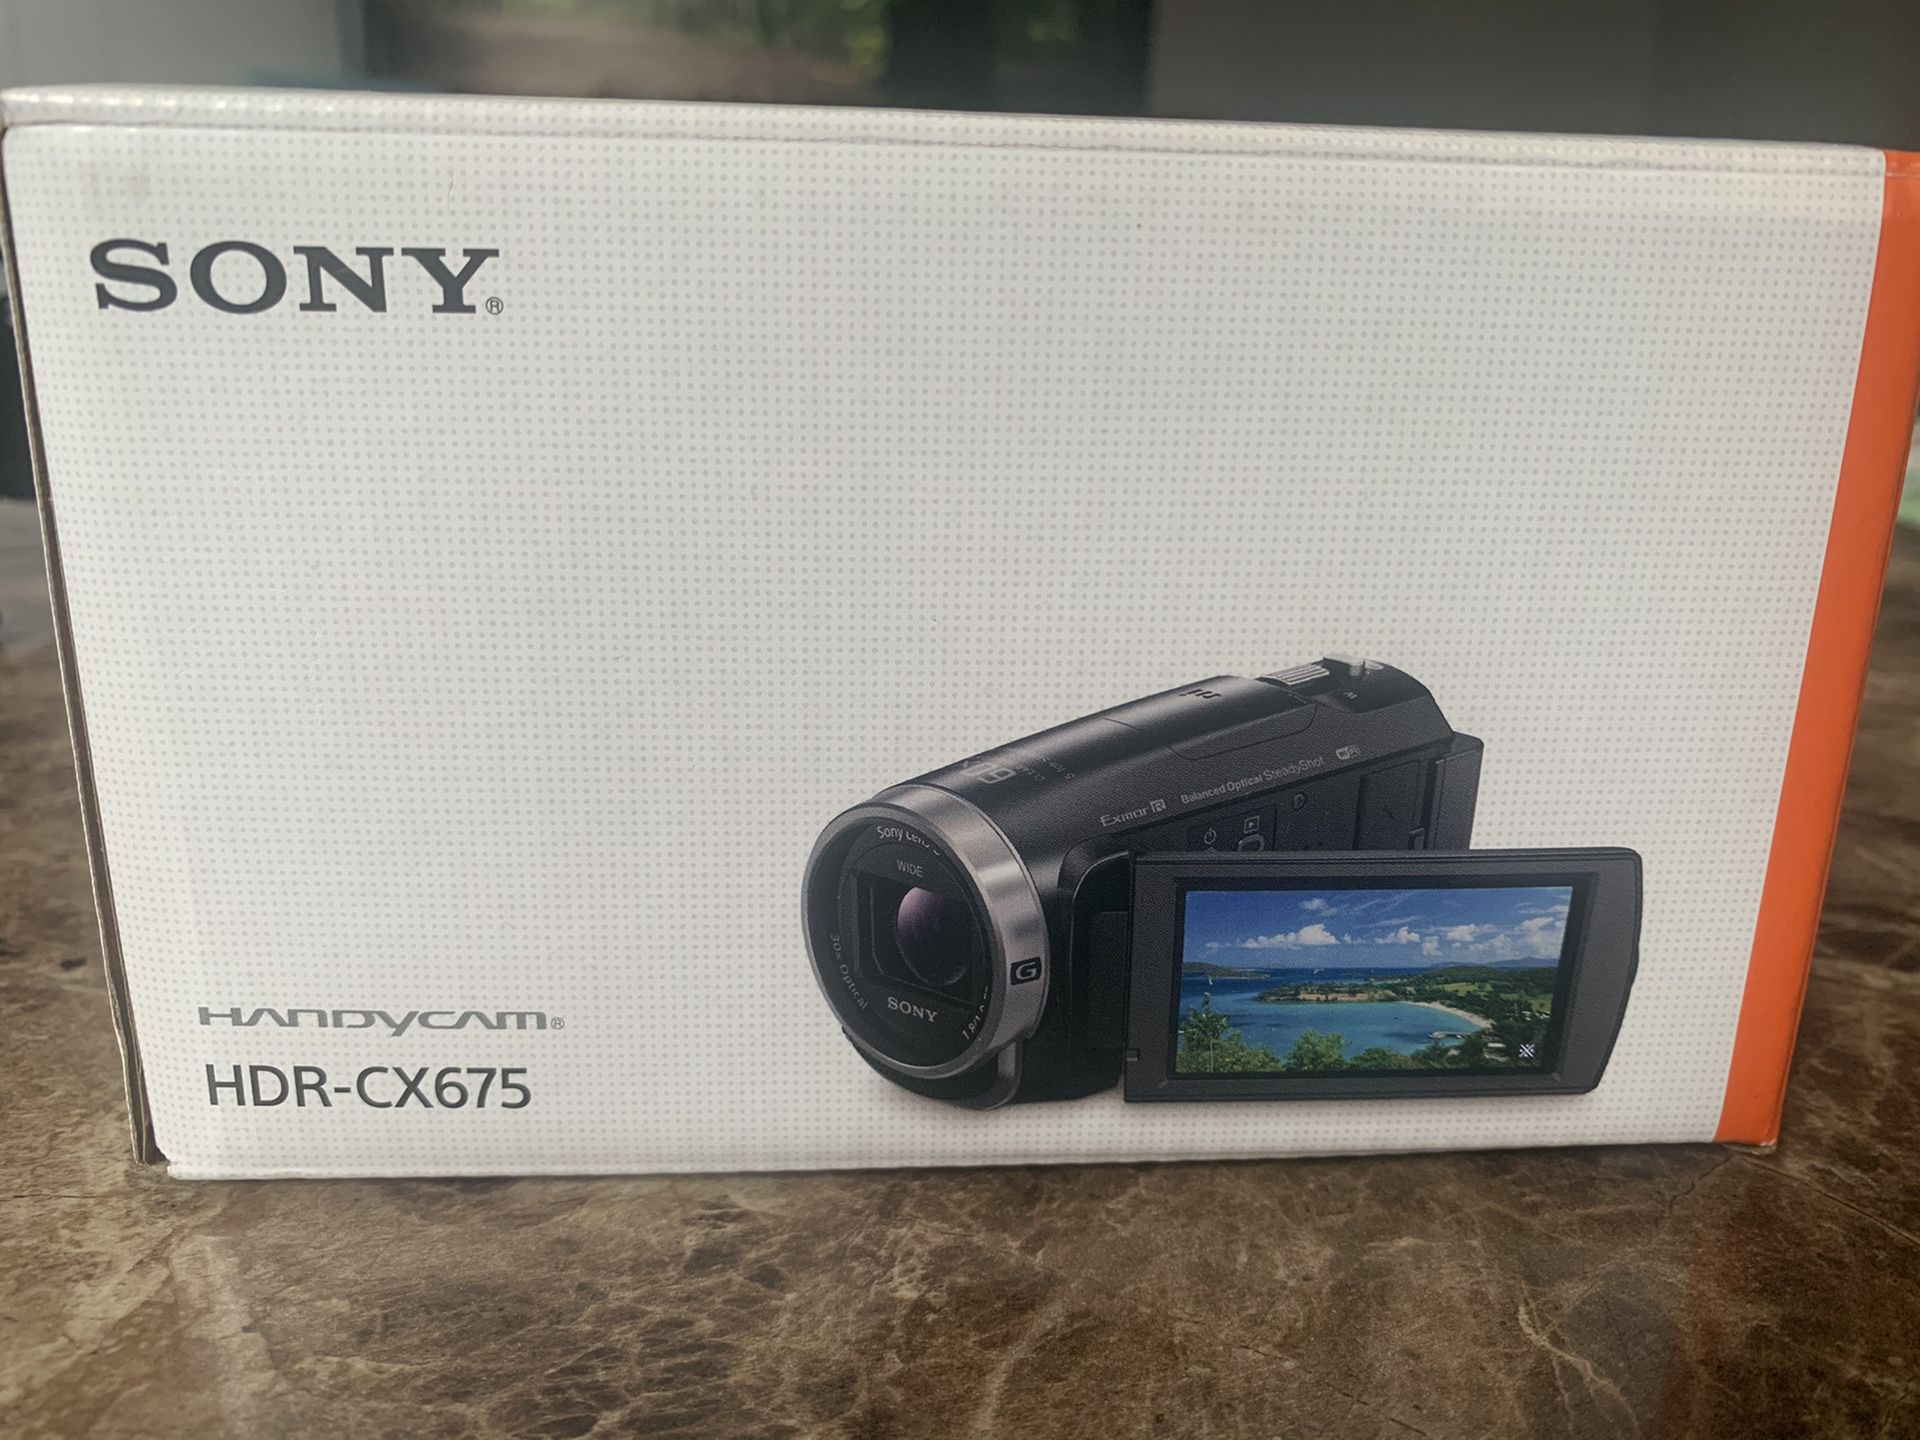 CAMERA BUNDLE - Sony Handycam HDR-CX675 Digital Camcorder - 3" - Touchscreen LCD